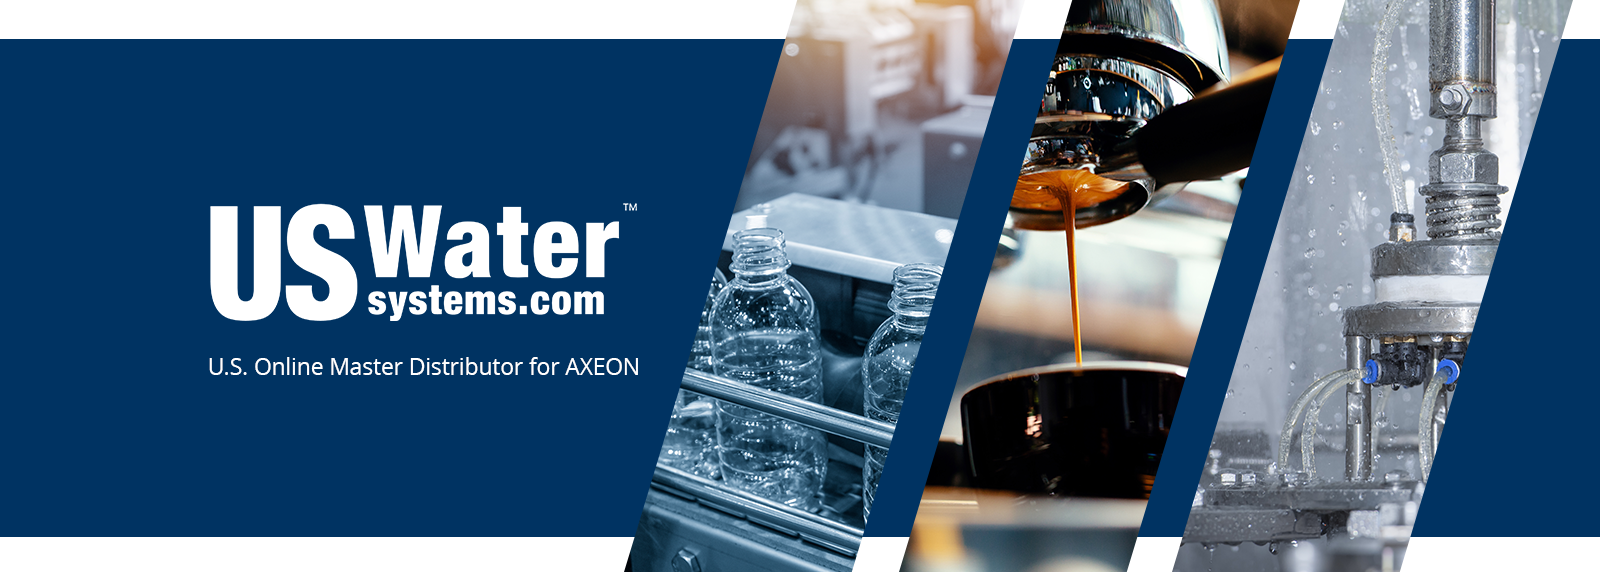 US Water Systems - US Online Master Distribution for AXEON